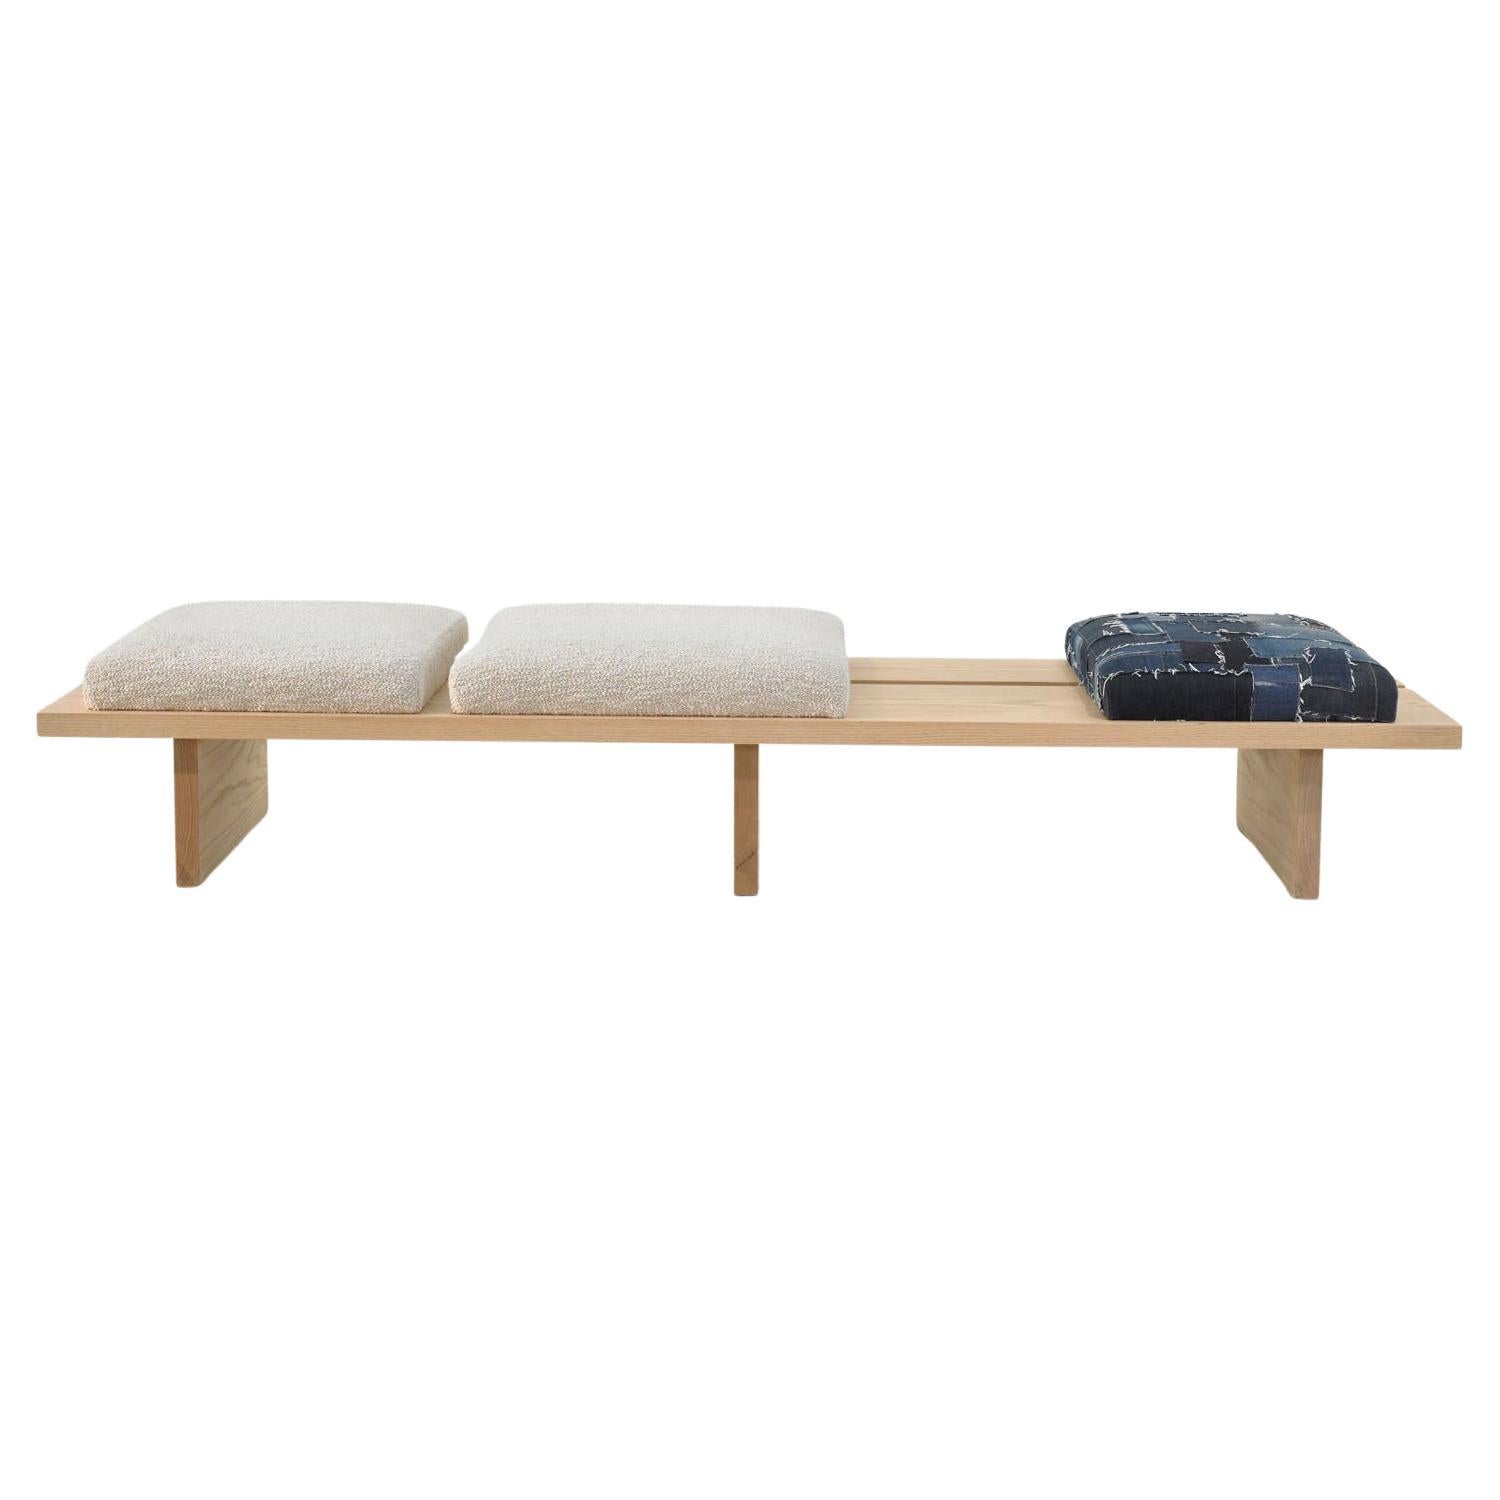 Minimalist Natural Oak Bench with Custom Wool Bouclé Seating byVivian Carbonell  For Sale